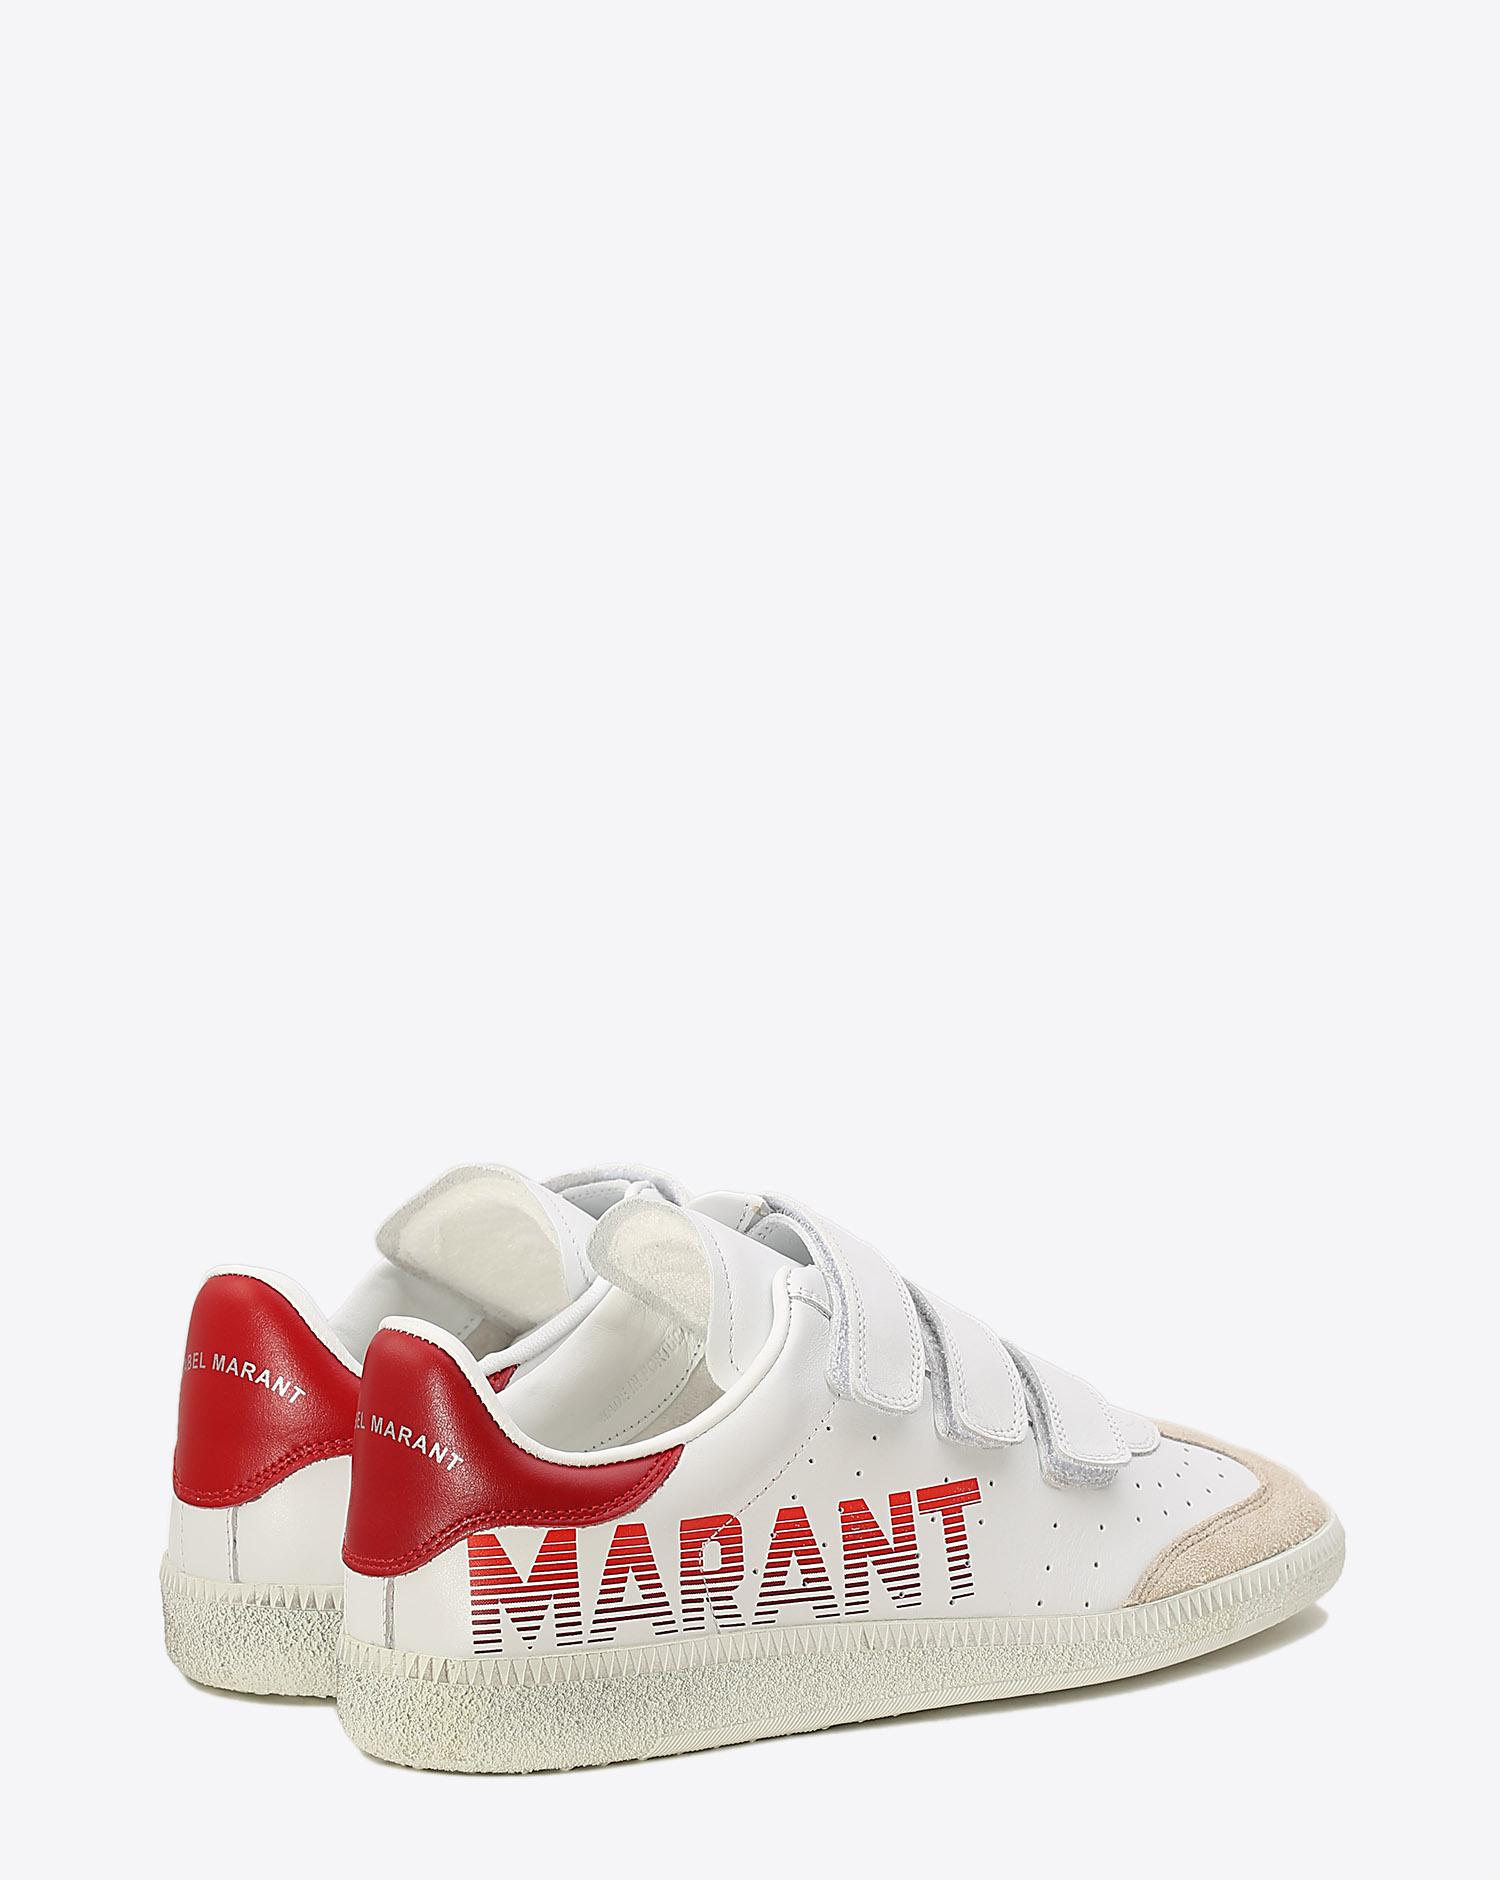 Isabel Marant Chaussures Sneakers BETH - "Marant" White  